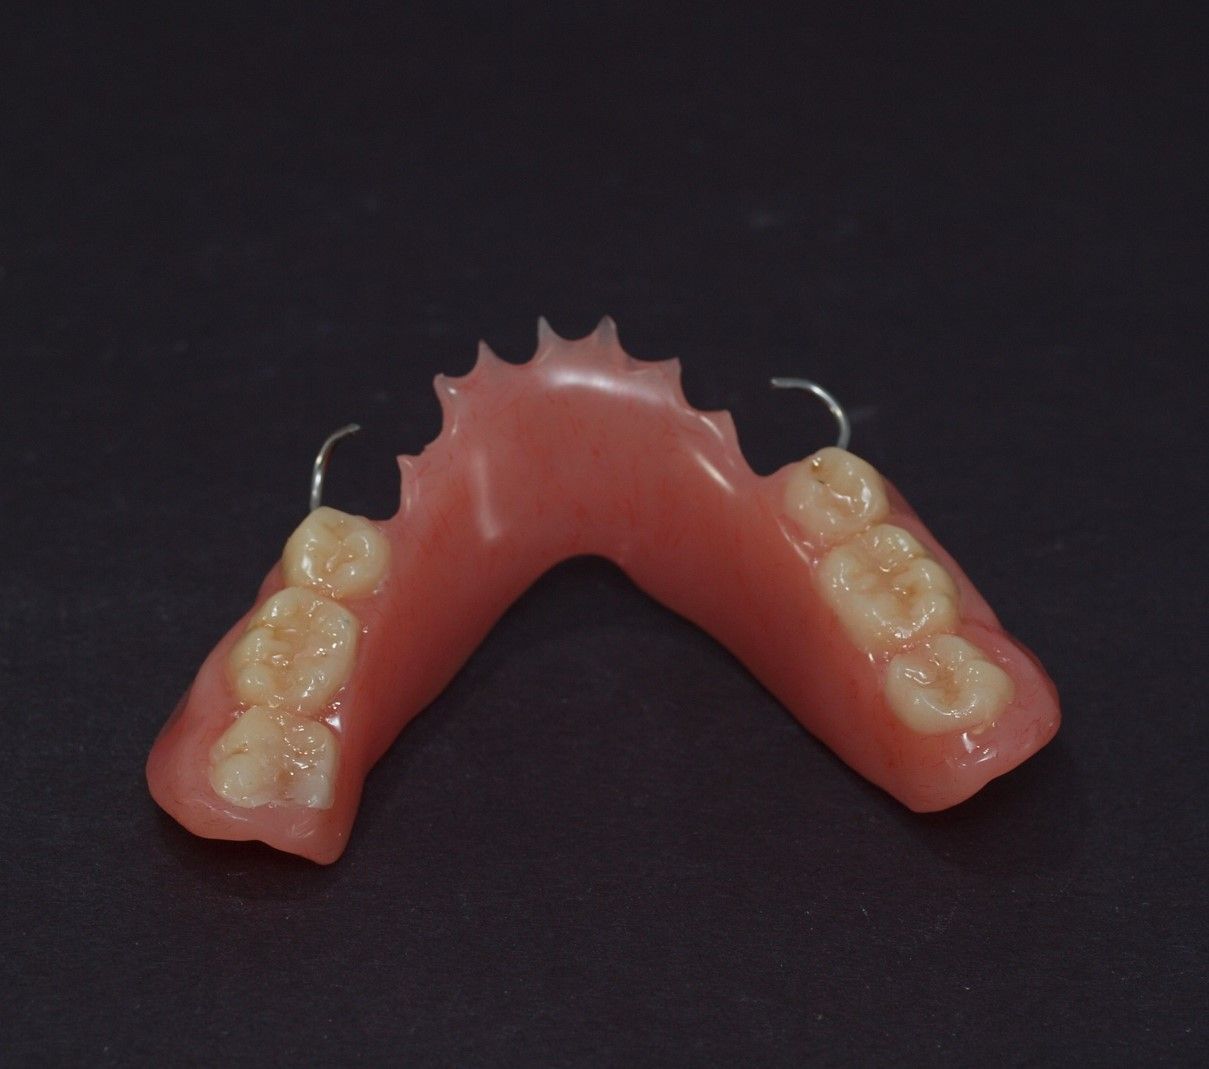 An all acrylic provisional including self-cure teeth. A fraction of the definitive cost but communicates the need for comprehensive treatment.